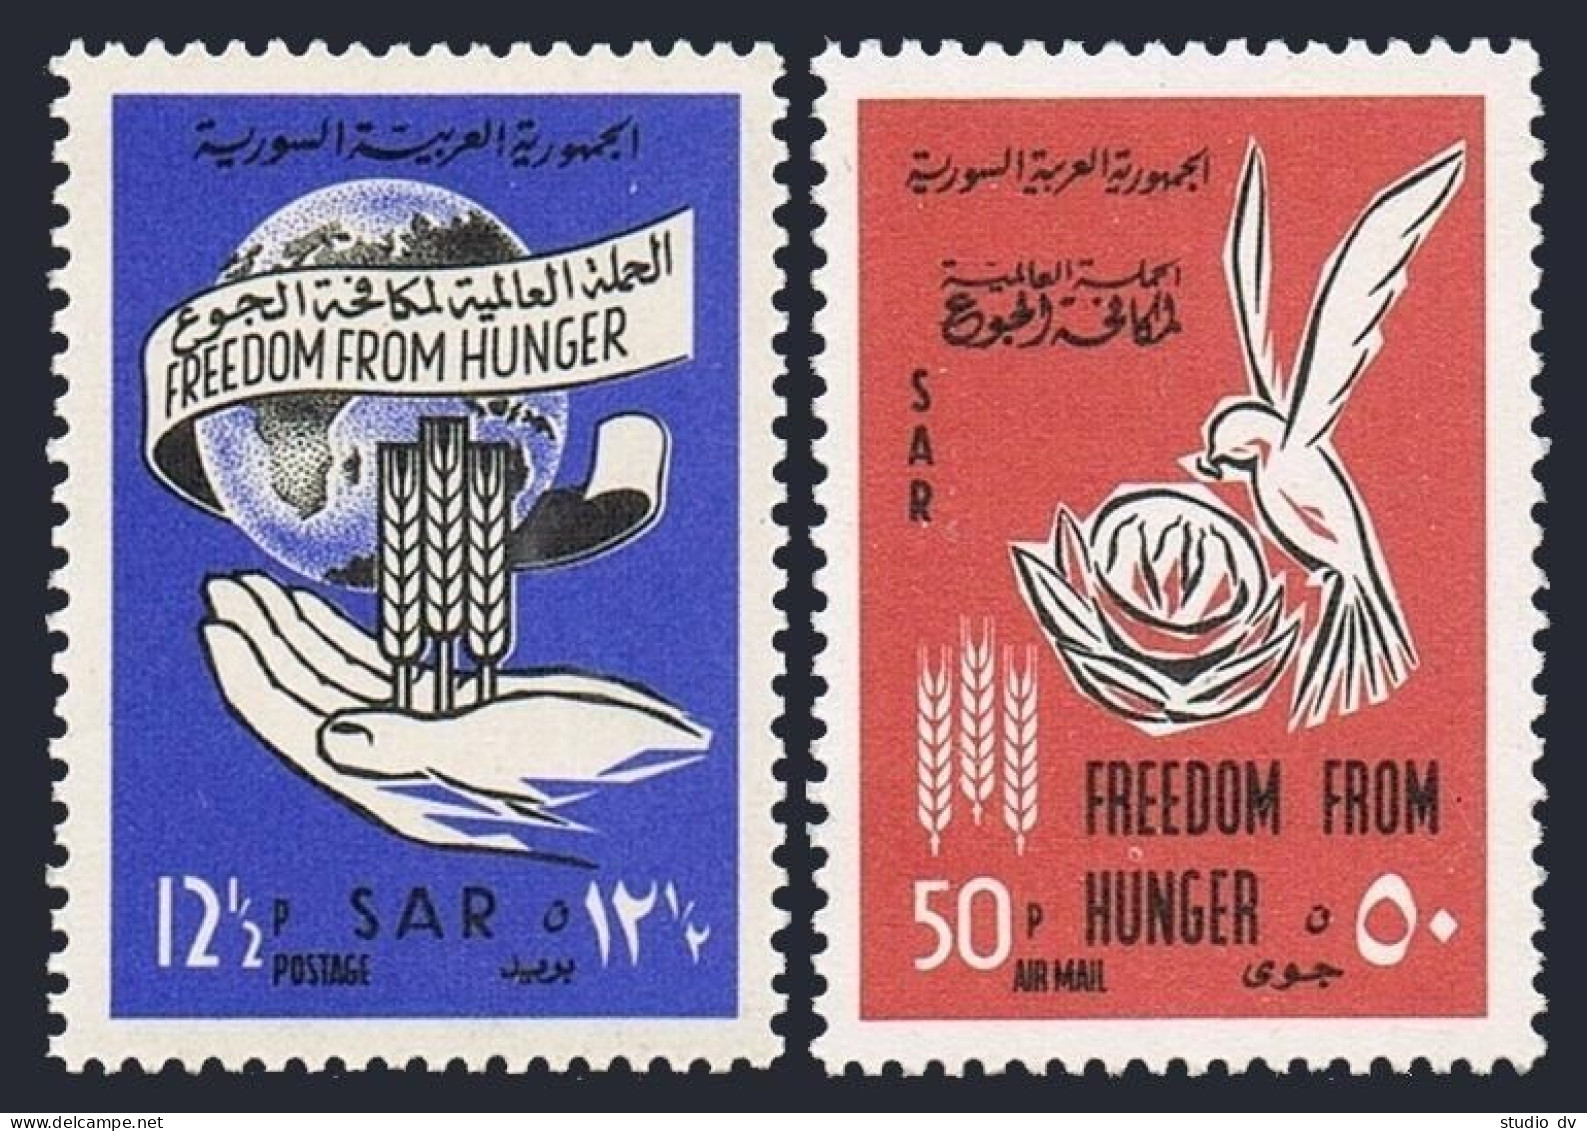 Syria 453,C290-C291a, MNH. Michel 831-832, Bl.49. FAO 1963. Freedom From Hunger. - Syria